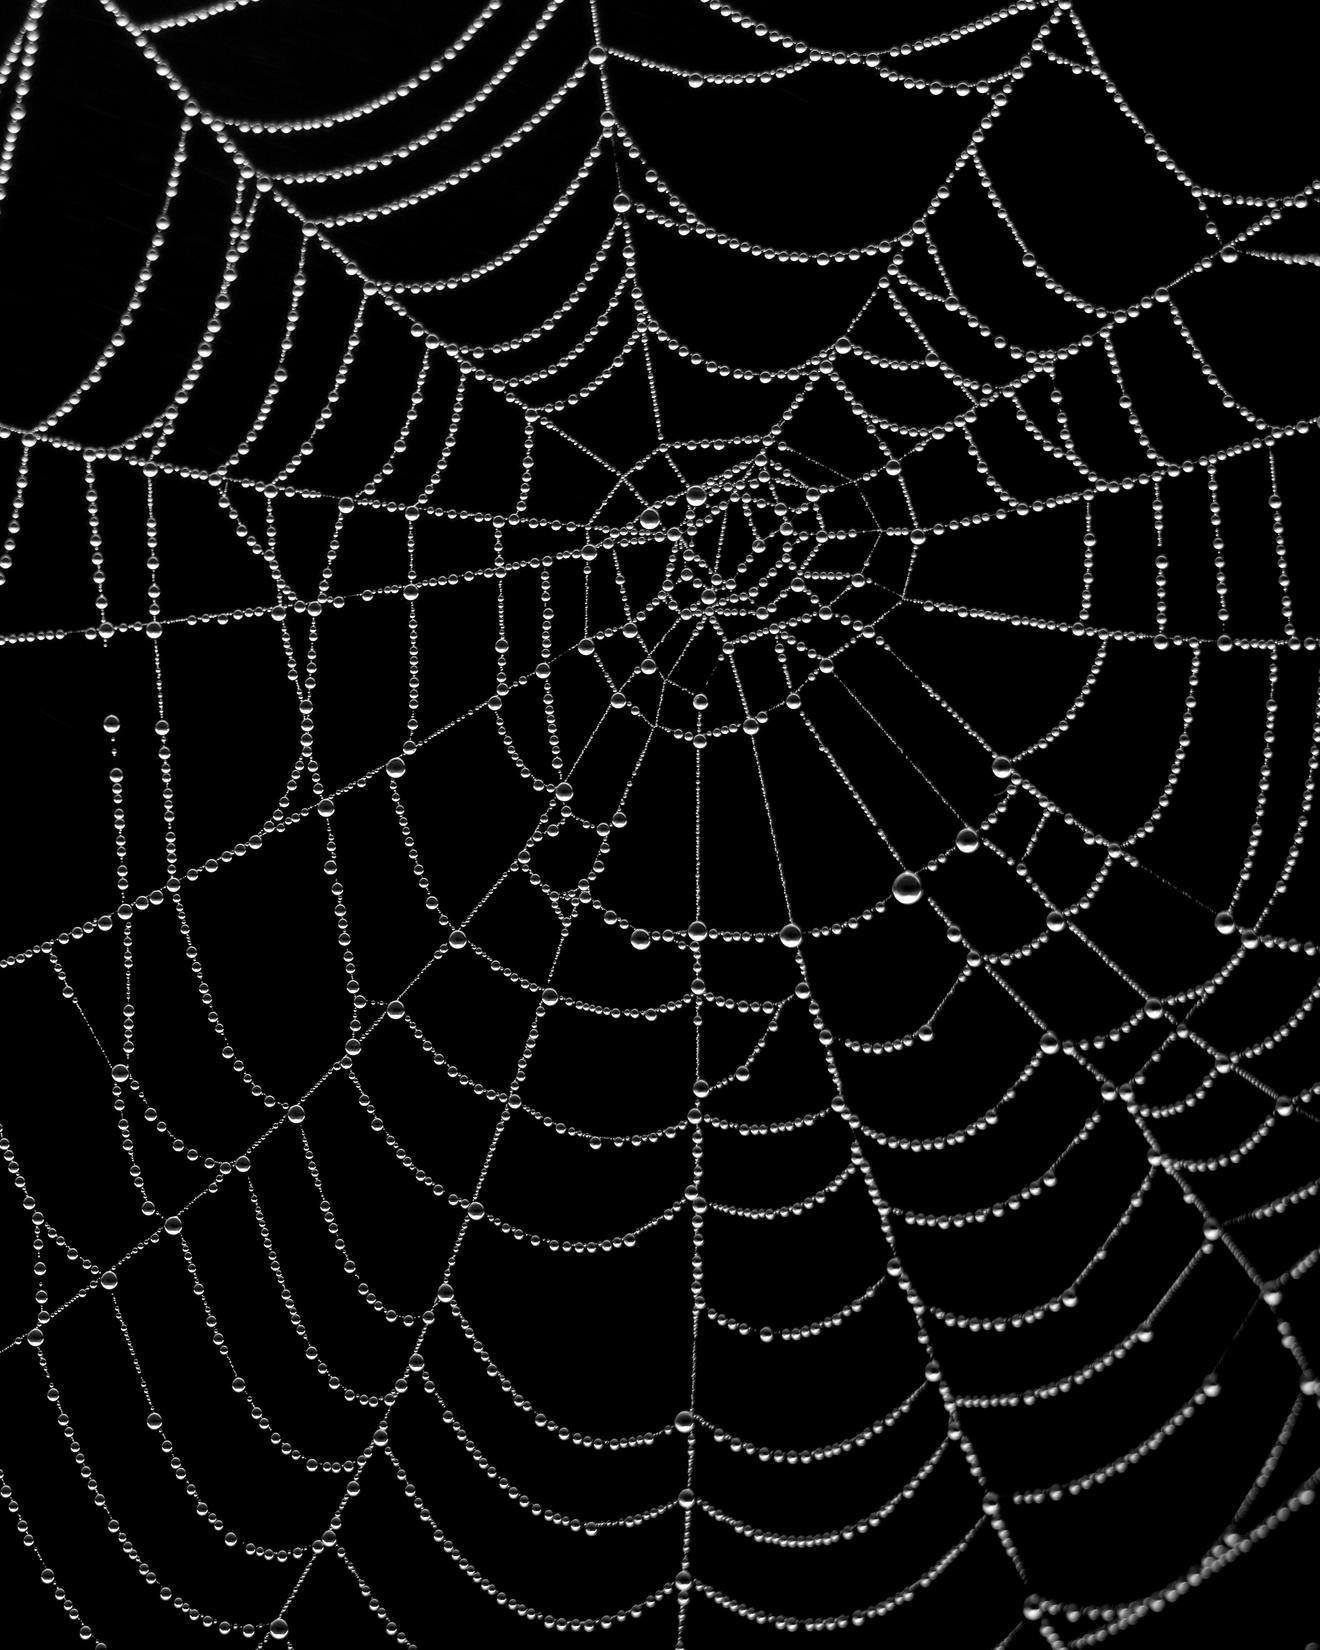 A spider's web glistens in white against a black background